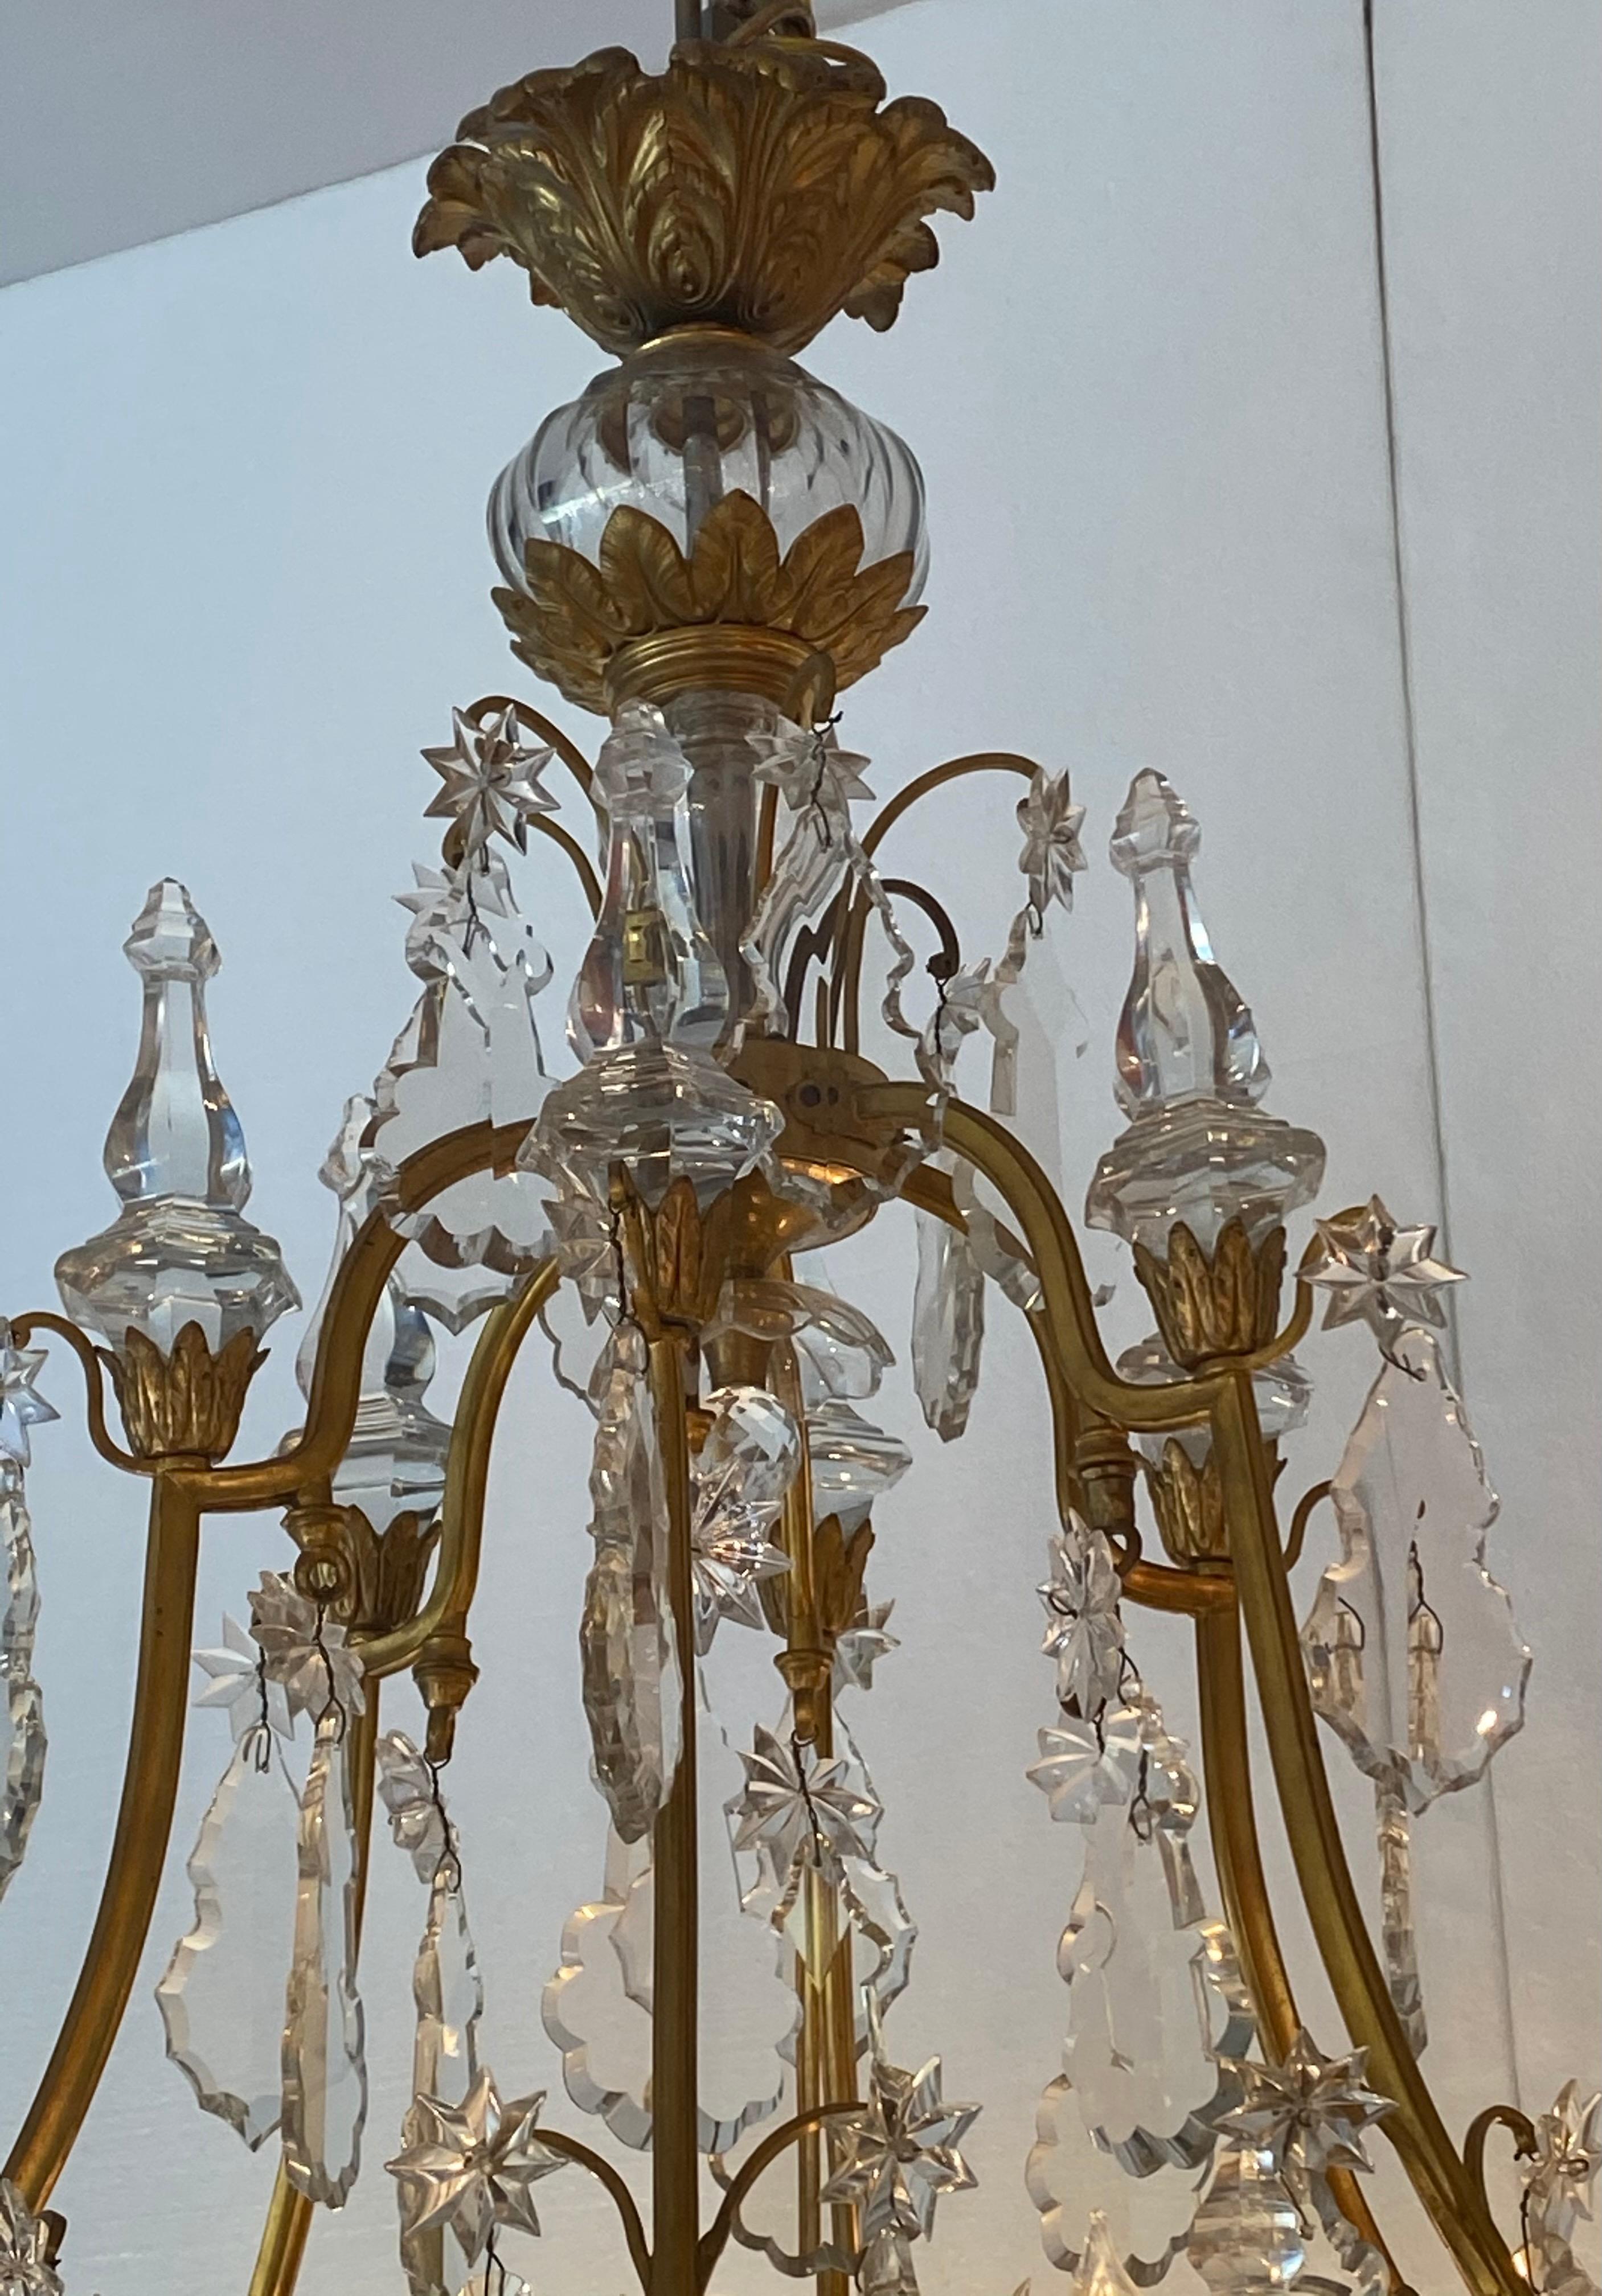 Antique French Empire Chandelier In Excellent Condition For Sale In Dallas, TX